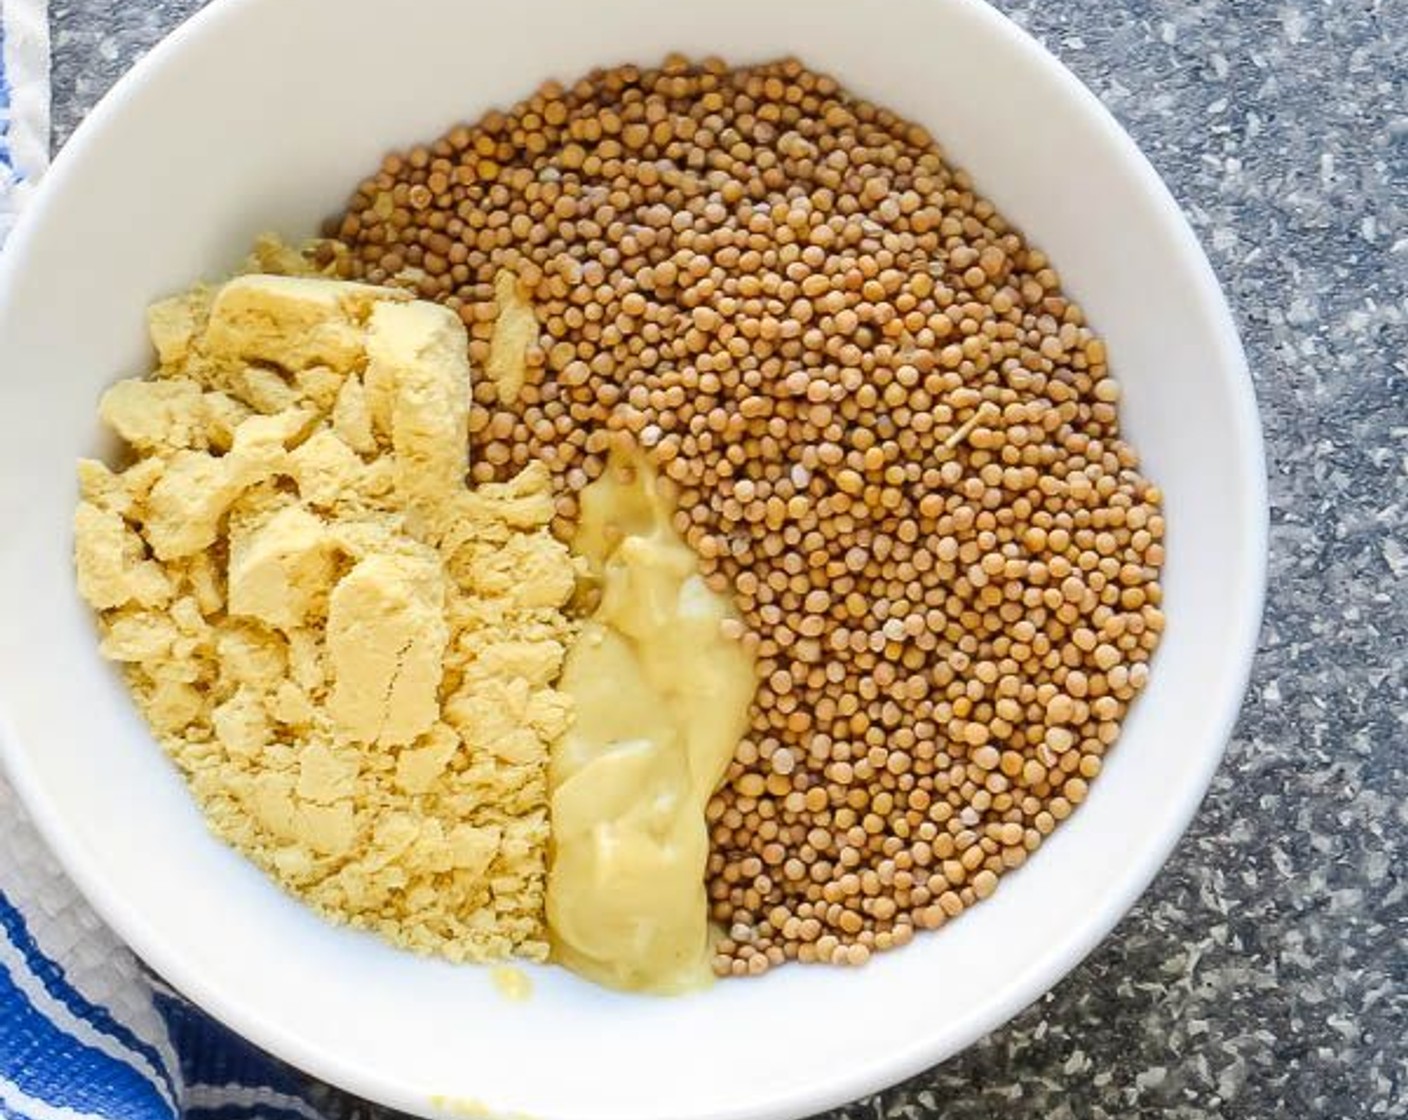 step 2 Combine the Dijon Mustard (3 Tbsp), Dry Mustard (2 Tbsp) and Mustard Seeds (1/4 cup) in a small bowl and stir. Add to the butter mixture.